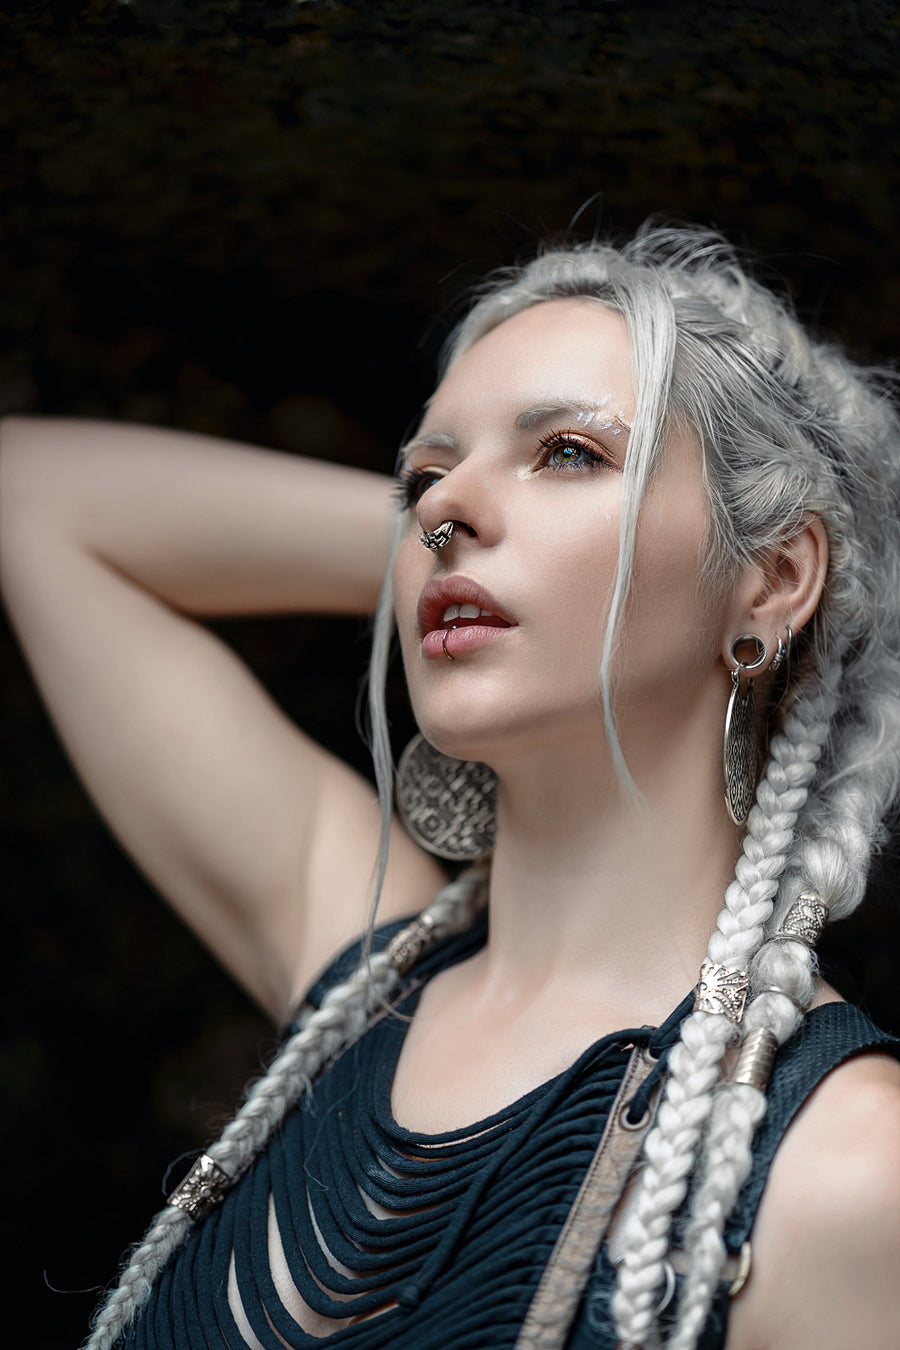 Ethereal woman with white braided hair and septum ring, showcasing large Shipibo-patterned earrings against a backdrop of lush greenery, reflecting a fusion of natural beauty and cultural artistry.